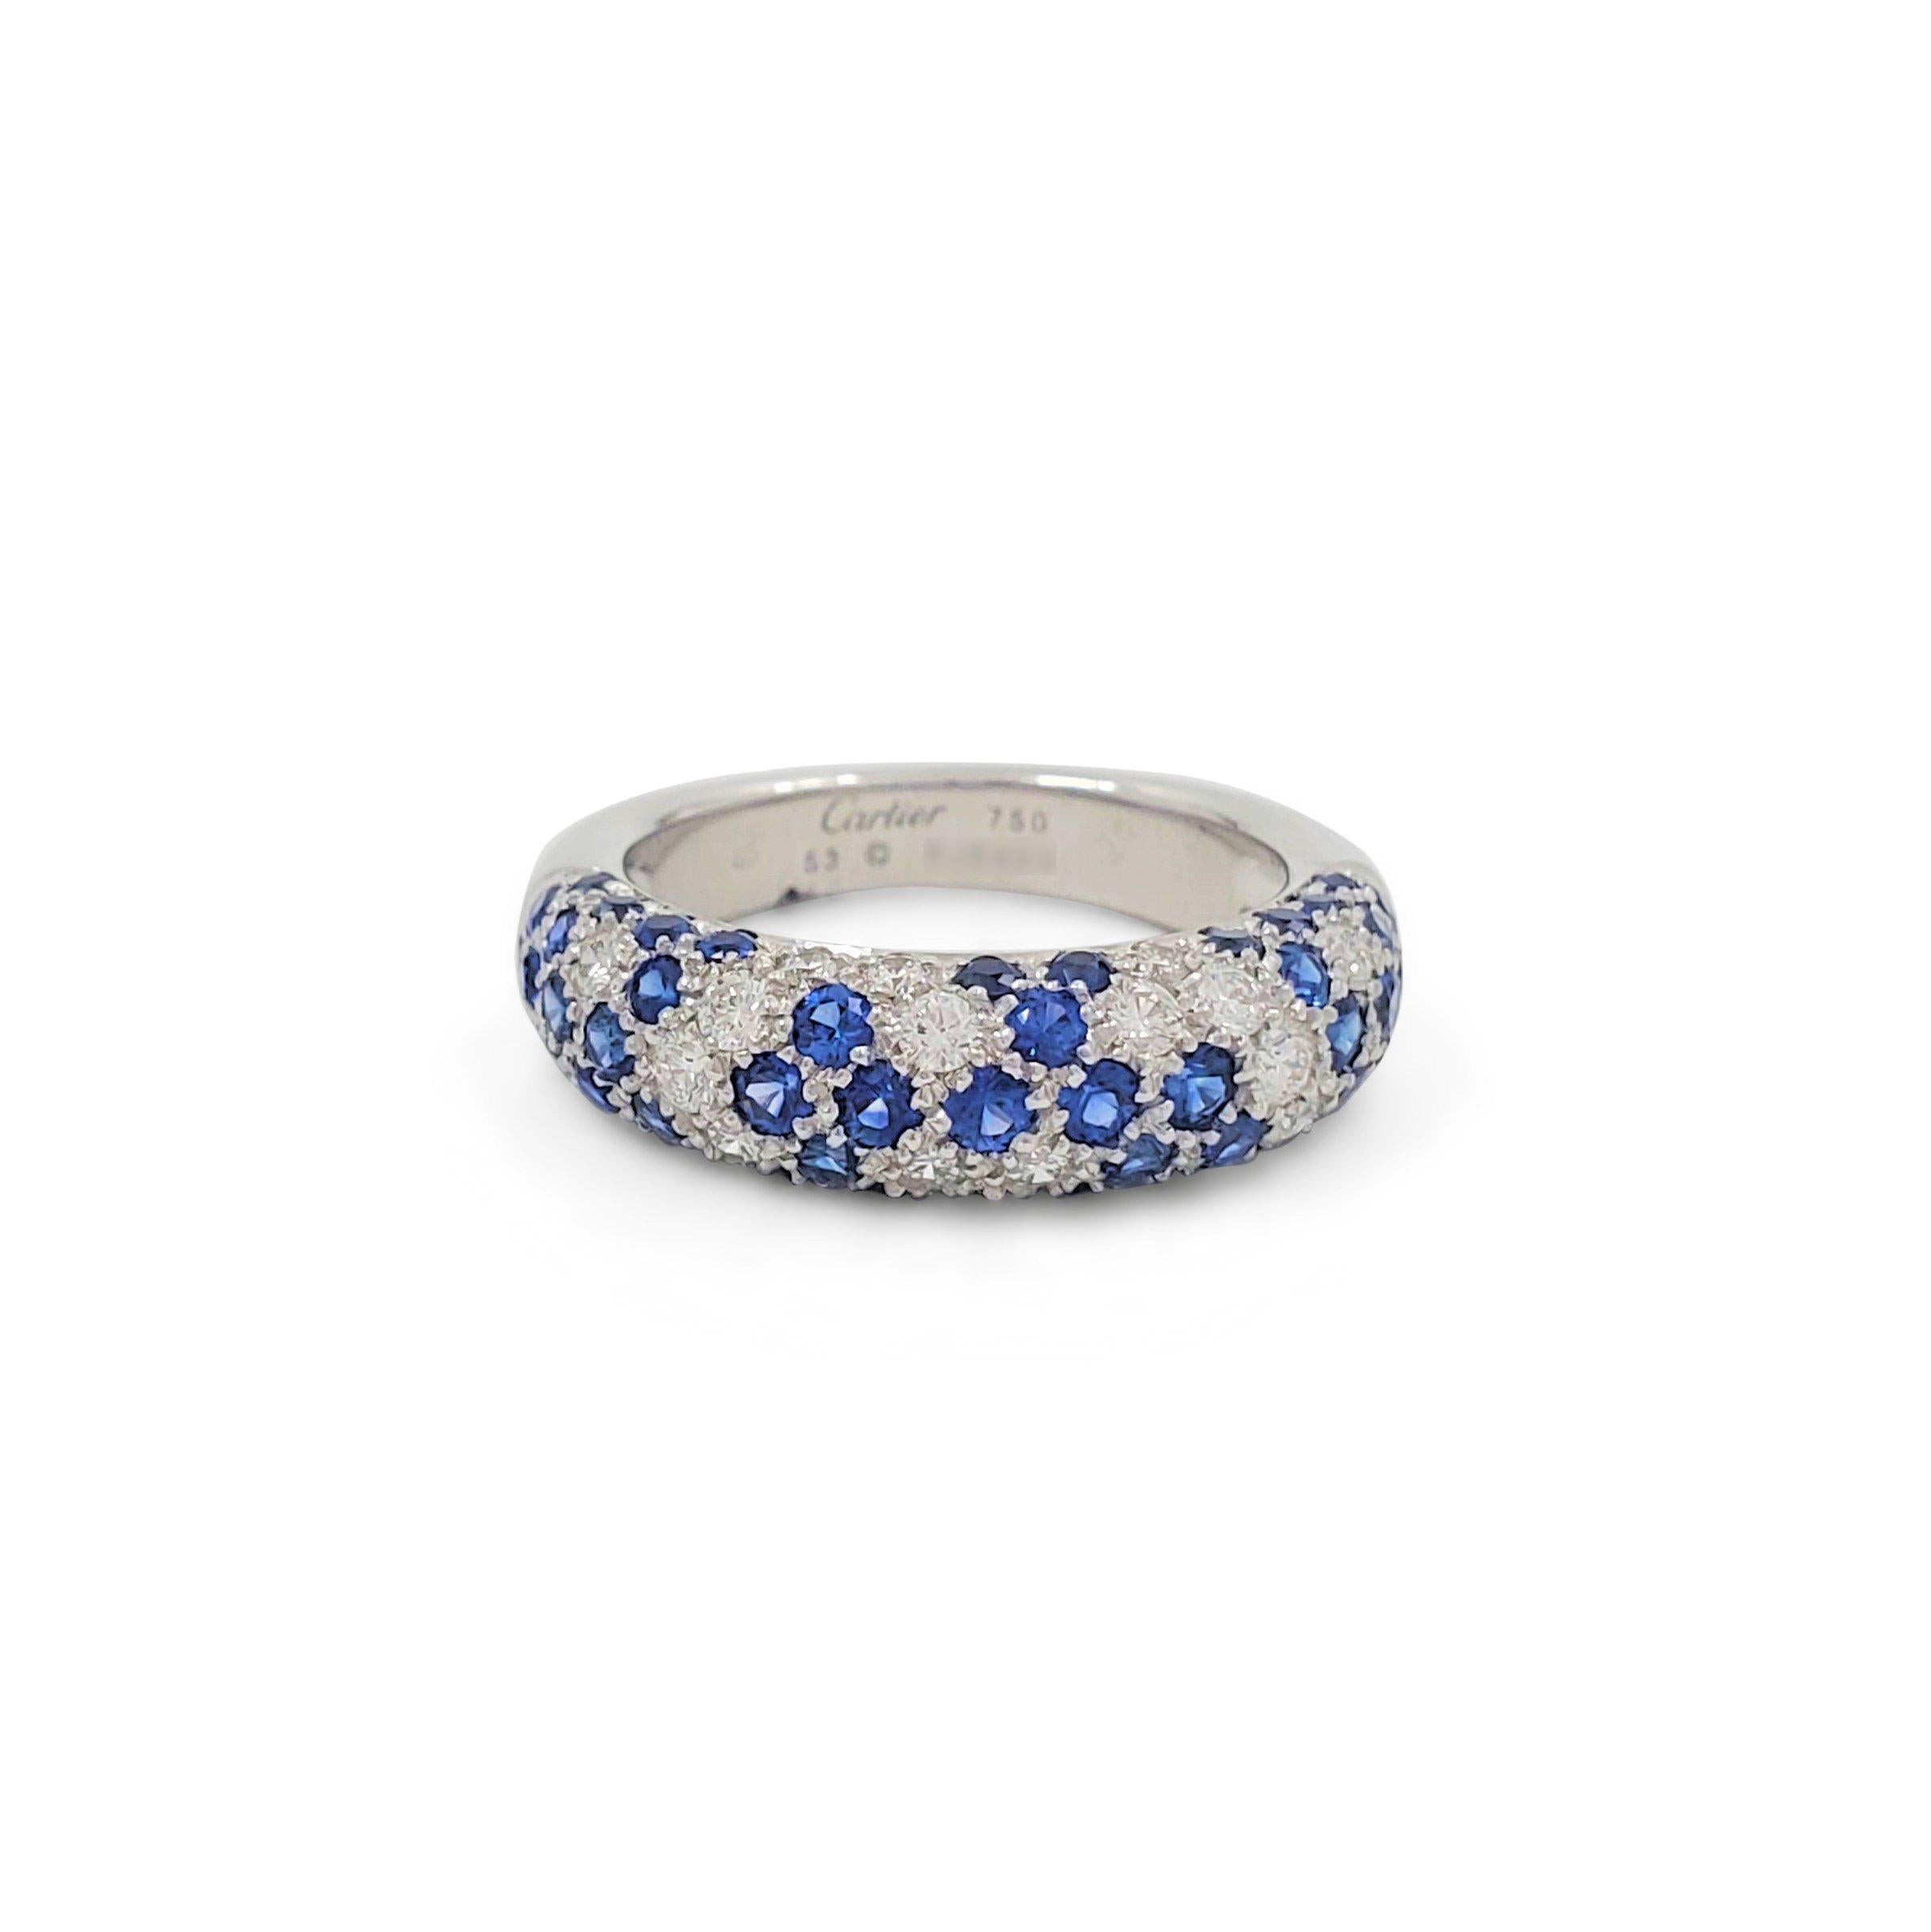 Authentic Cartier 'Mimi Star' dome-shaped ring crafted in 18 karat white gold is set with vivid blue sapphires and sparkling round brilliant cut diamonds (E-F, VS) weighing an estimated 0.38 carats total. Signed Cartier, 750, 53, with serial number